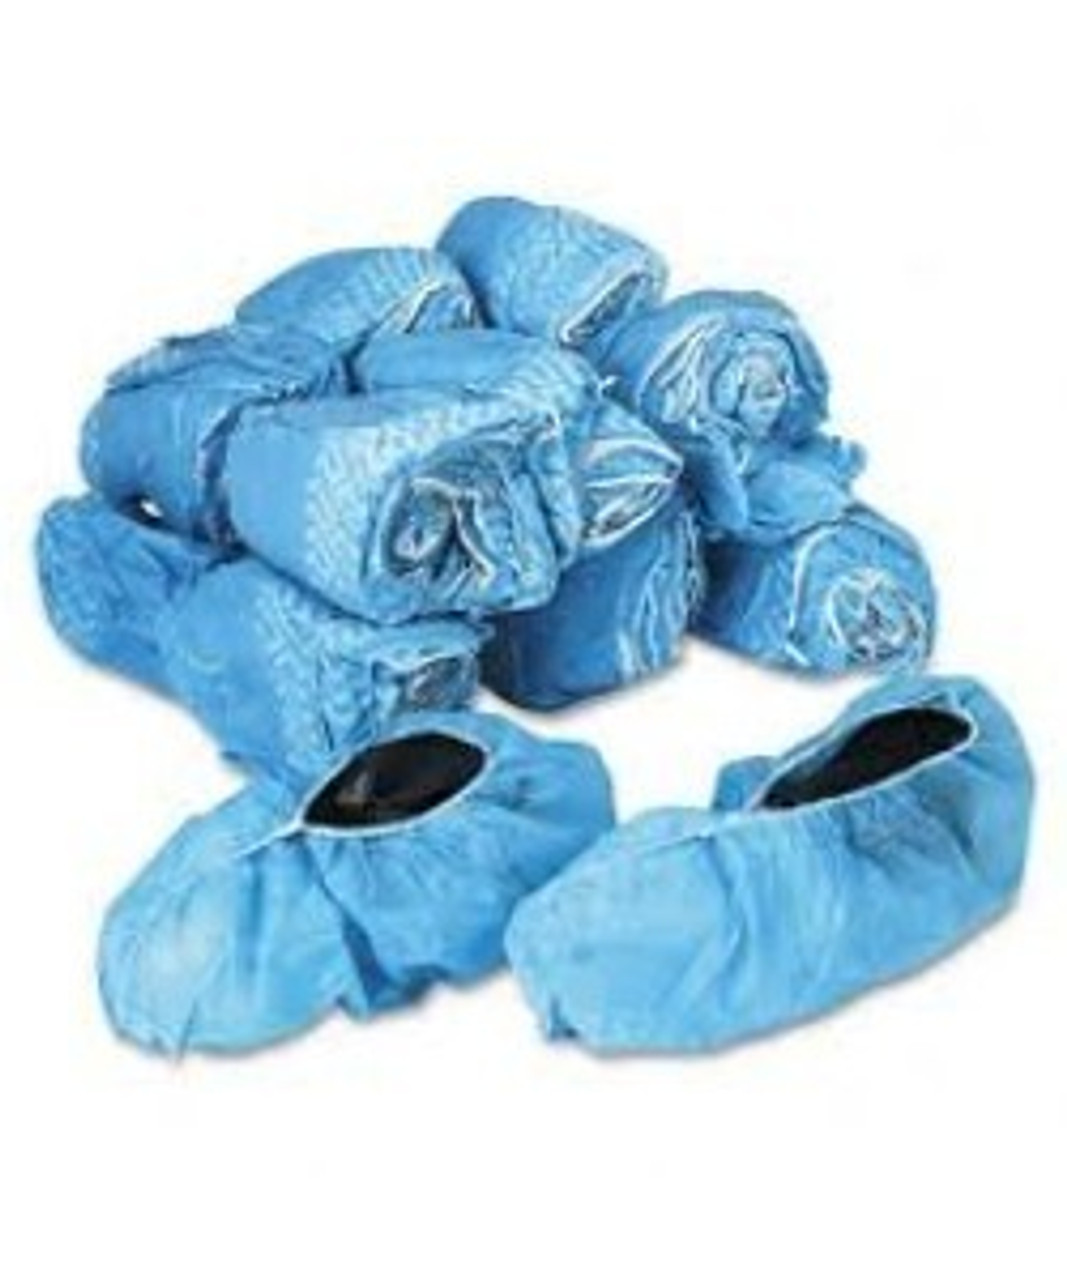 Shoe Covers - 2X Large